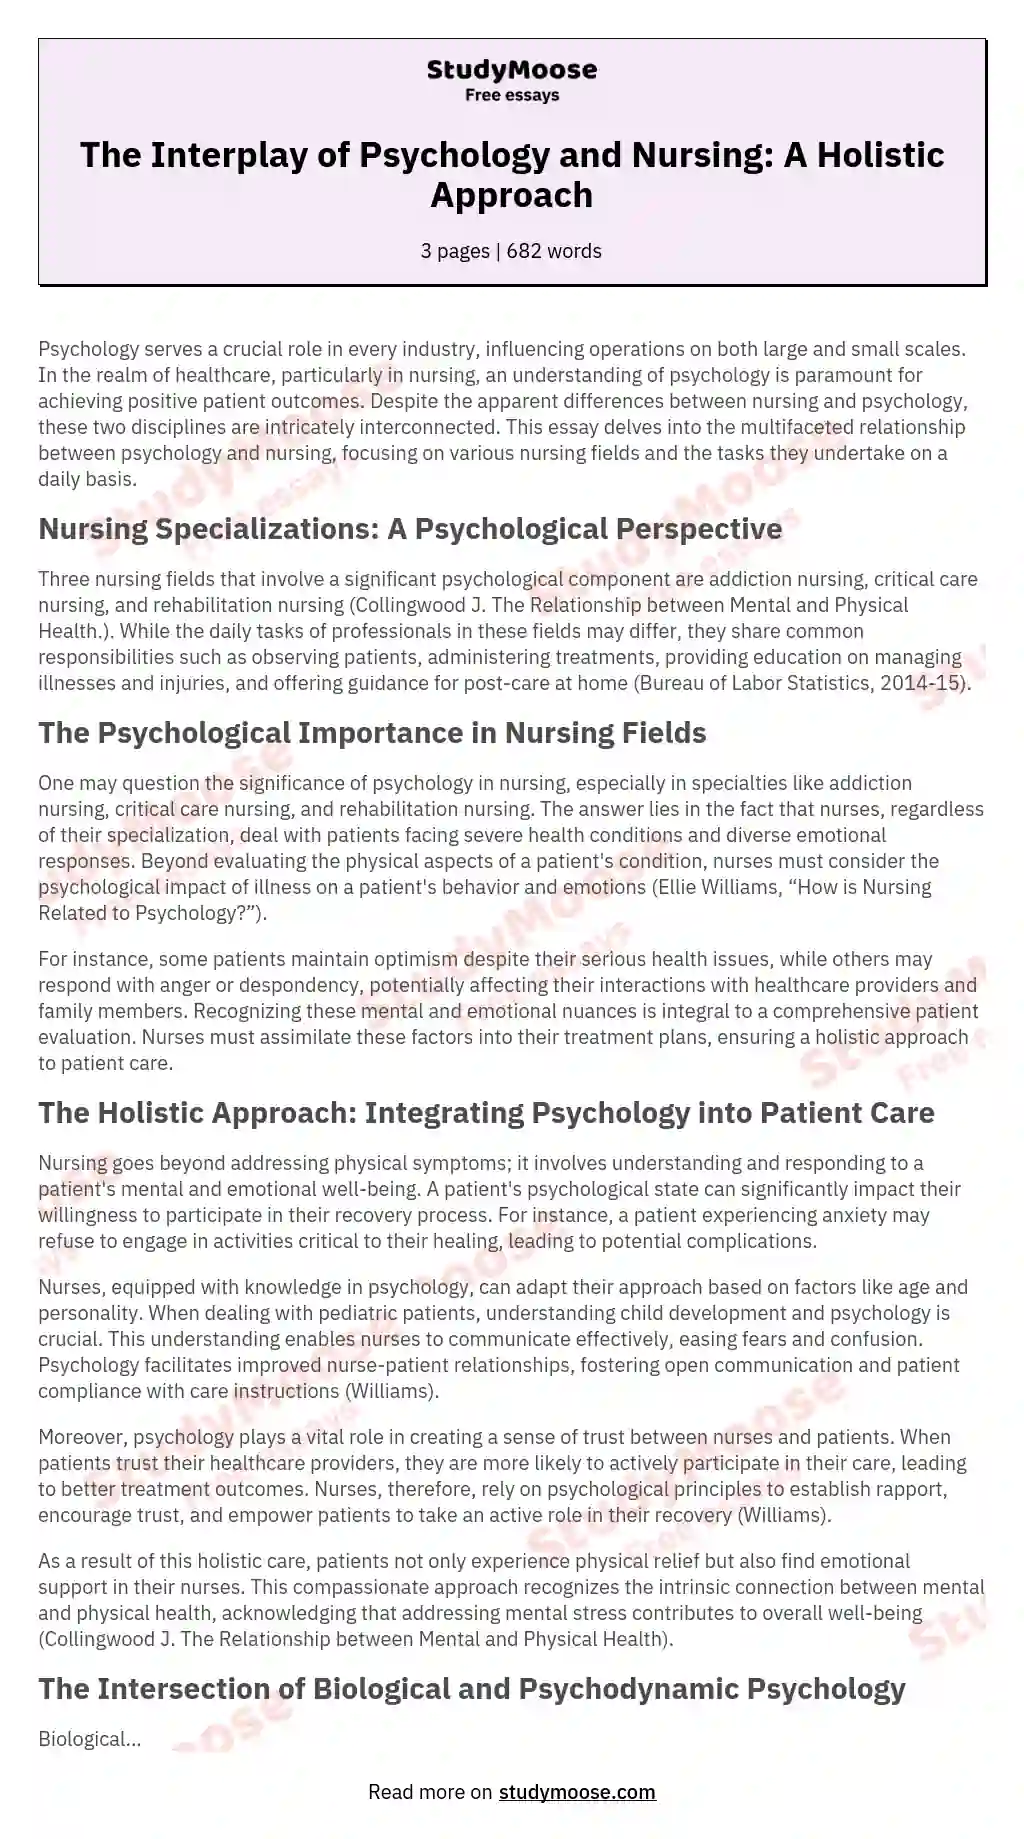 The Interplay of Psychology and Nursing: A Holistic Approach essay